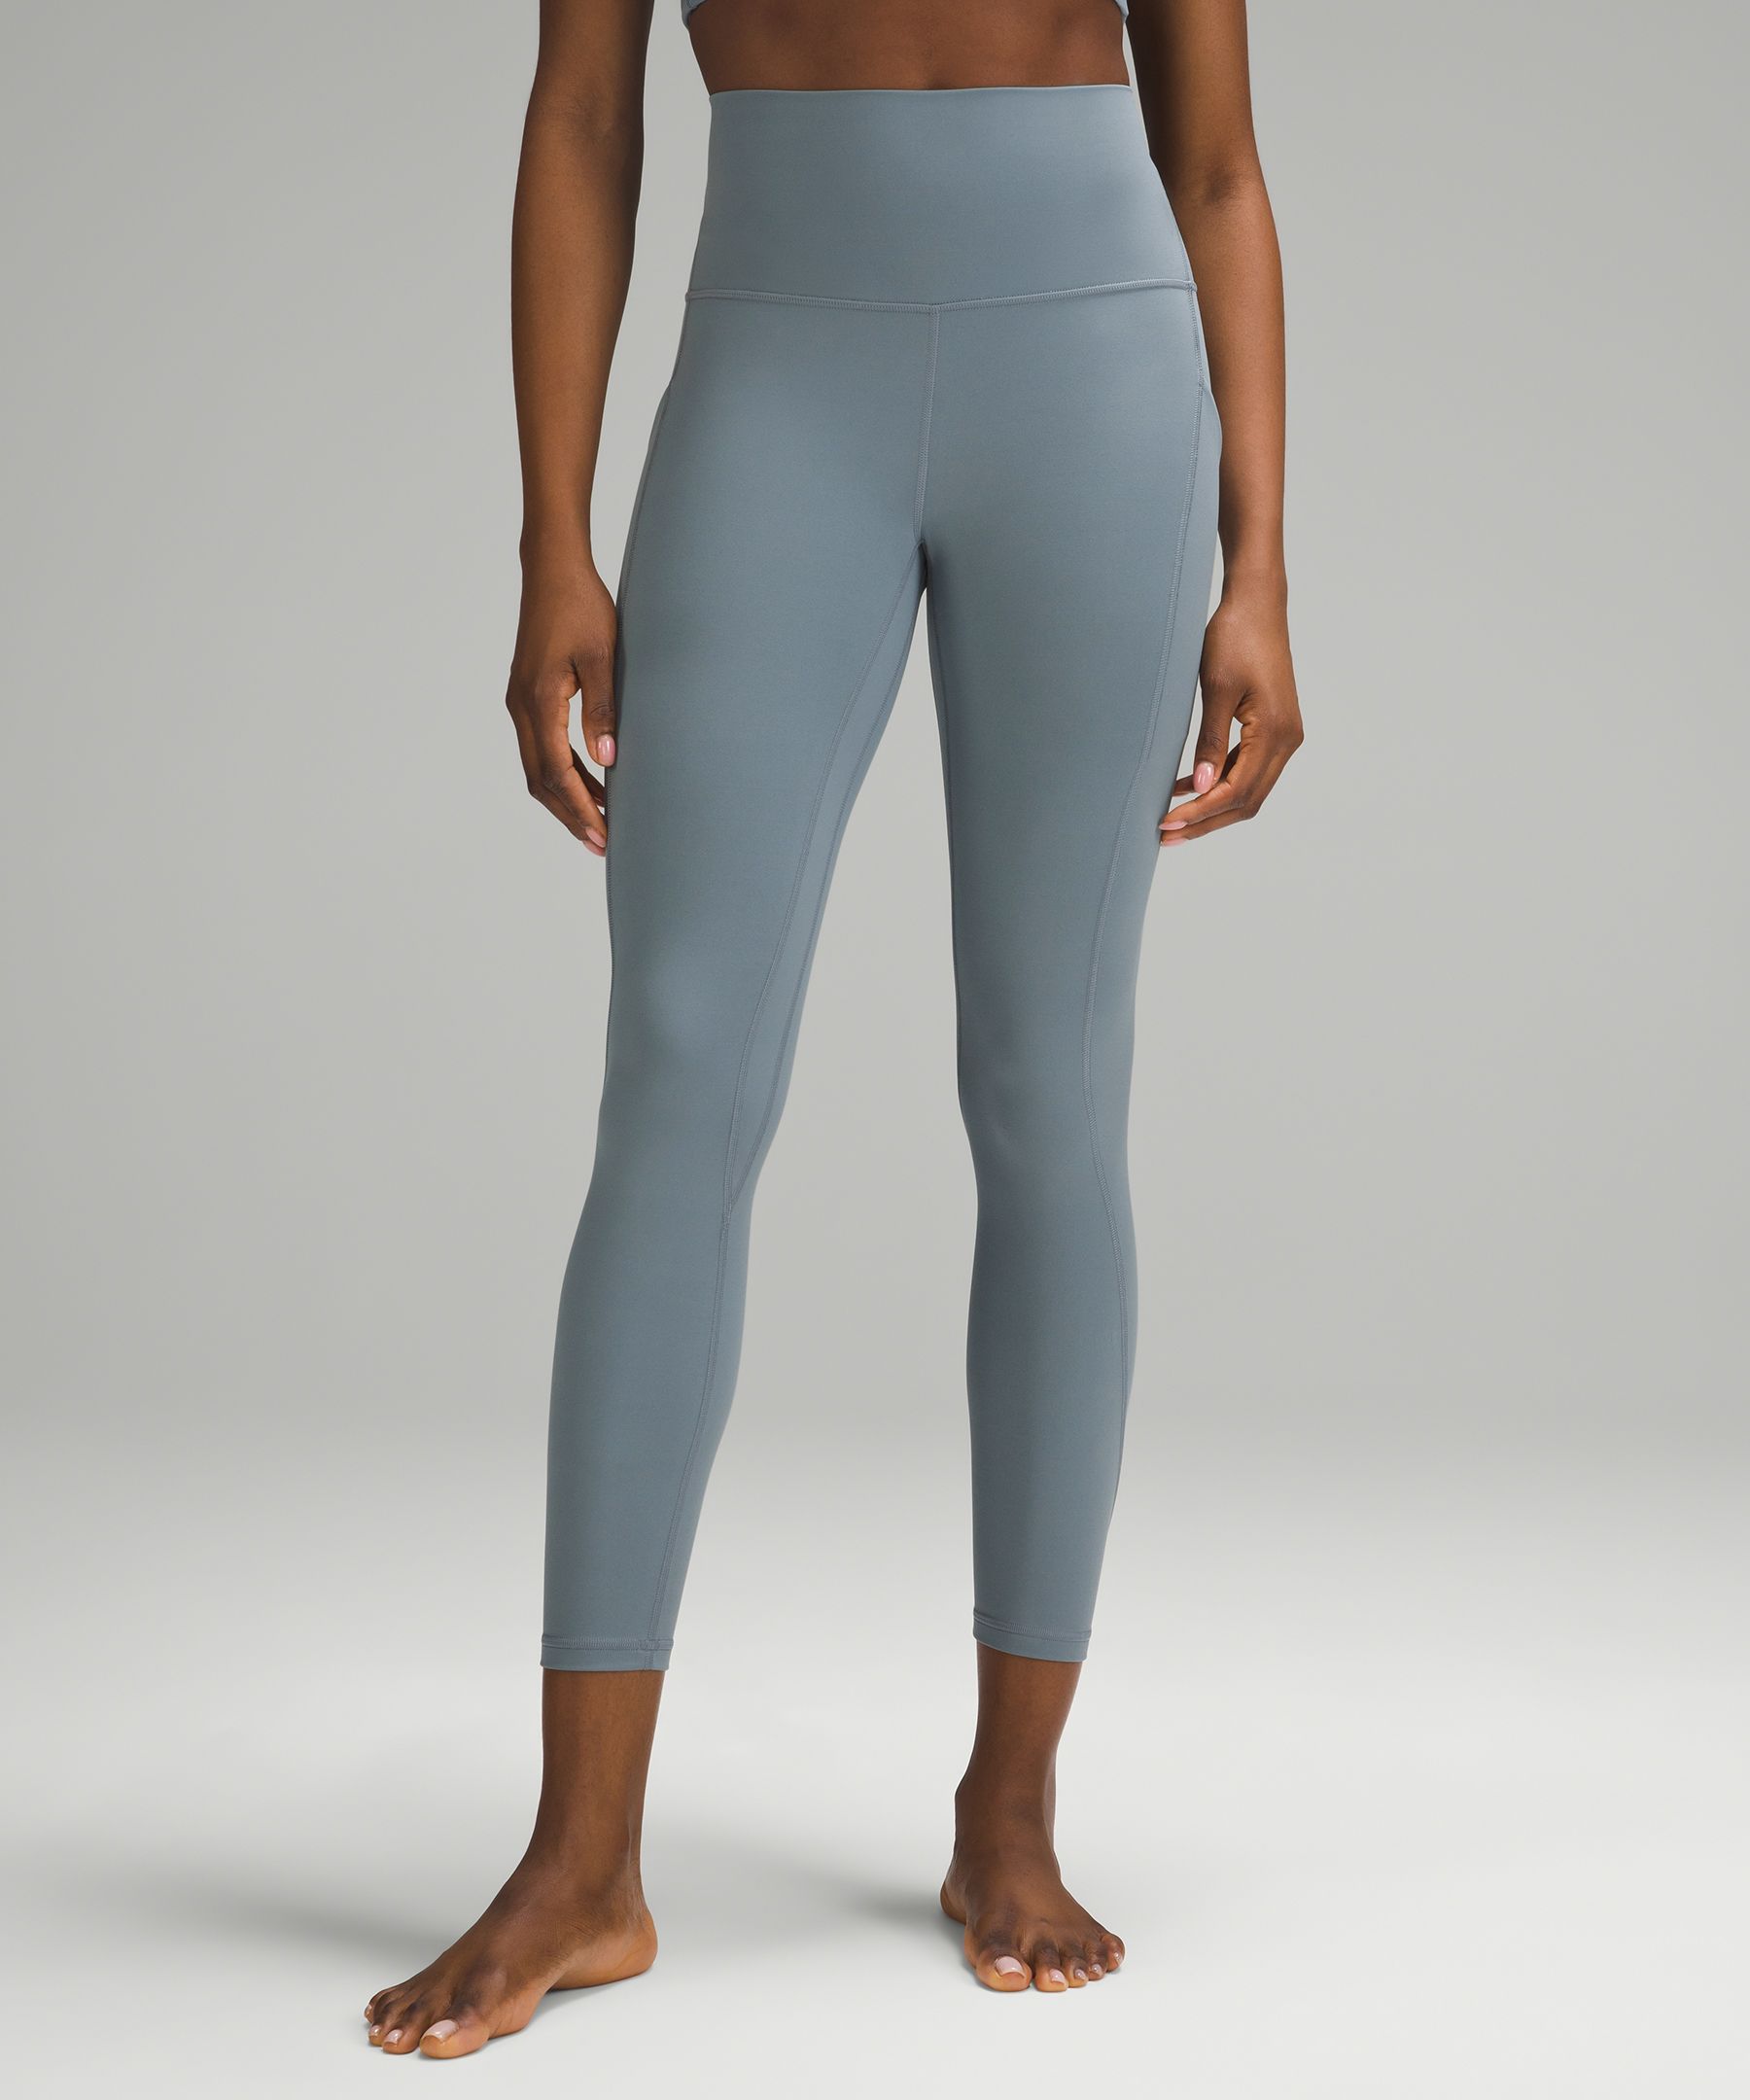 lululemon Align™ High-Rise Pant with Pockets 25" | Women's Pants